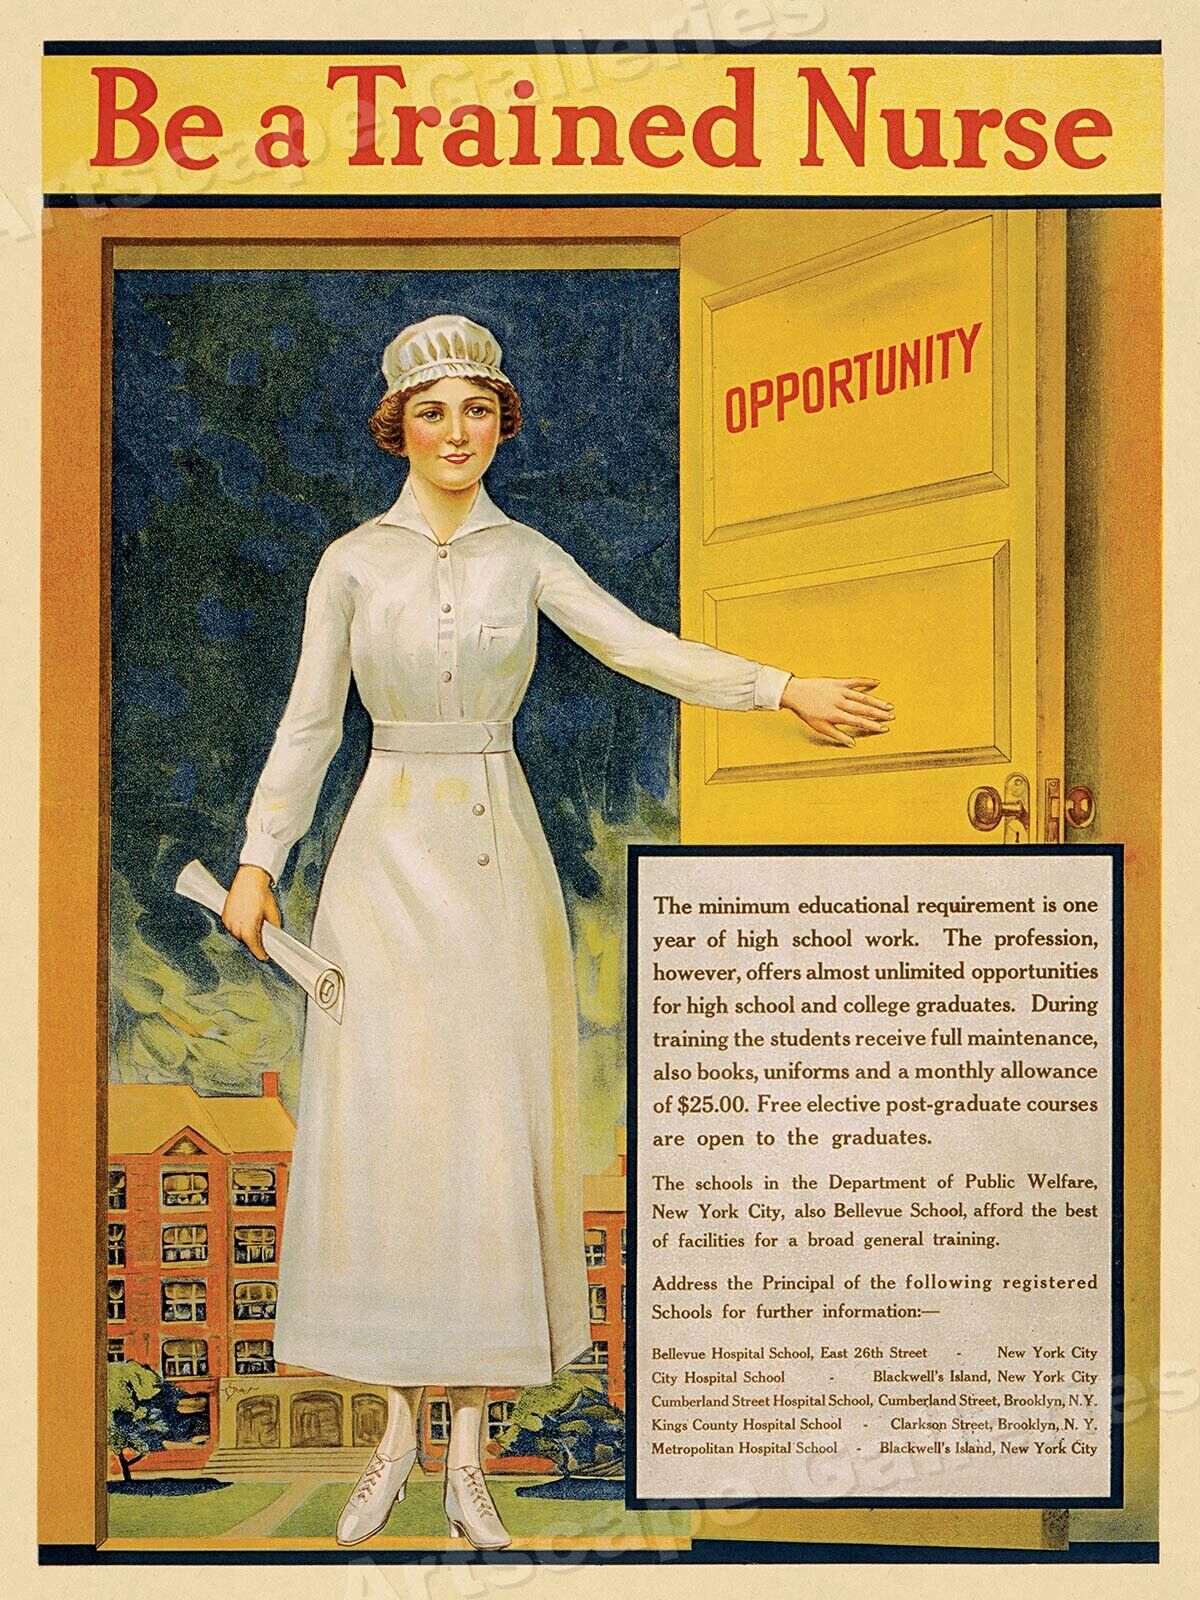 Be A Trained Nurse 1917 World War I Nursing Medical Recruiting Poster - 18x24